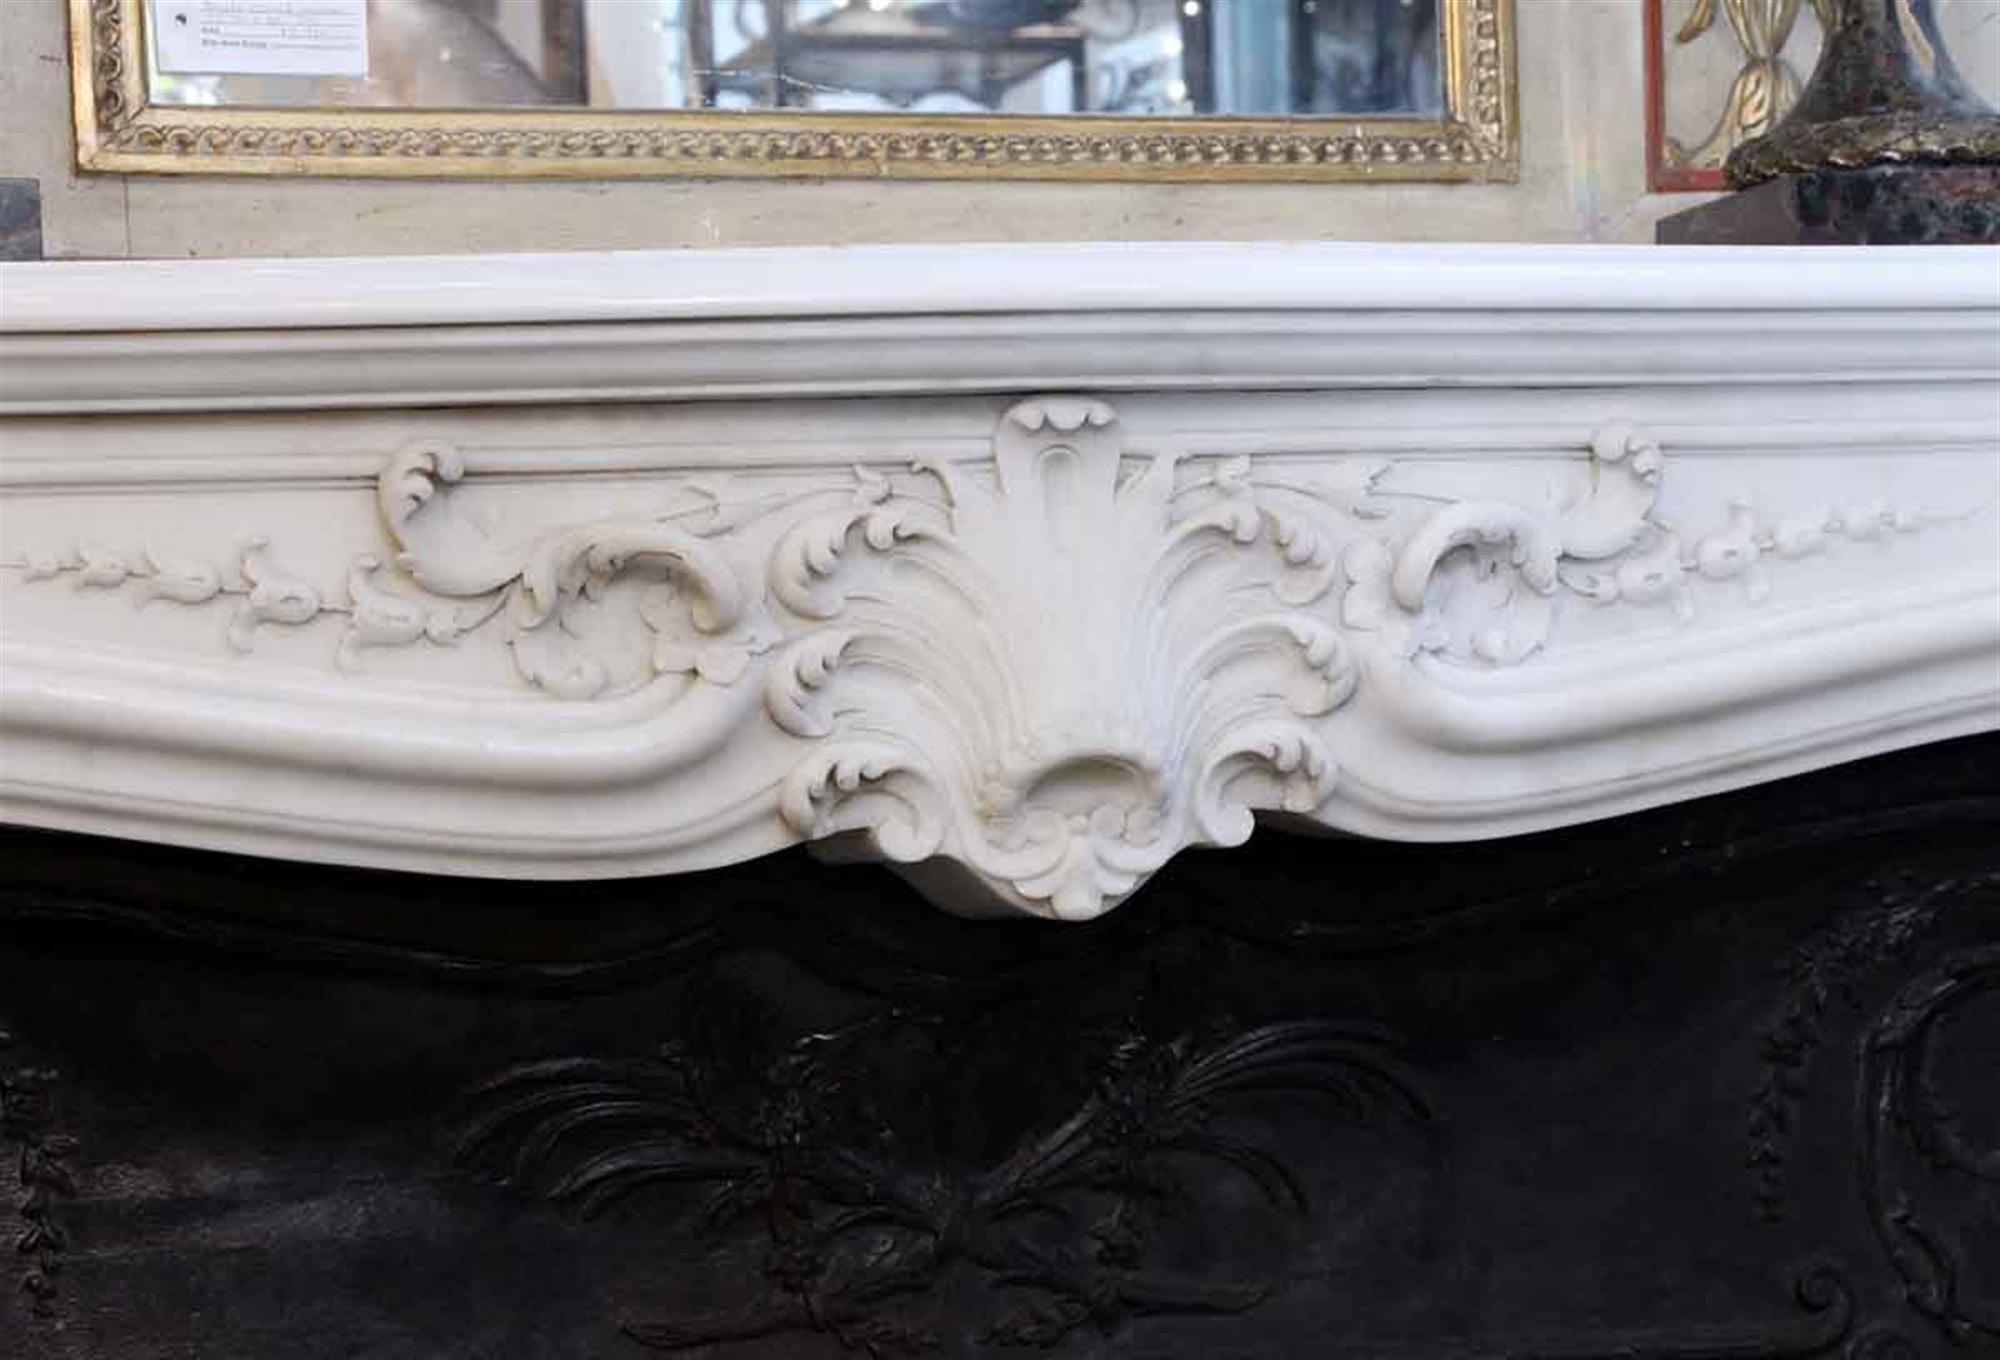 1870s beautifully detailed French white marble mantel with carved designs and over-the-top details at the keystone. A black decorative cast iron insert is included. Overall in excellent condition, but has one big scrape on the left leg and a few